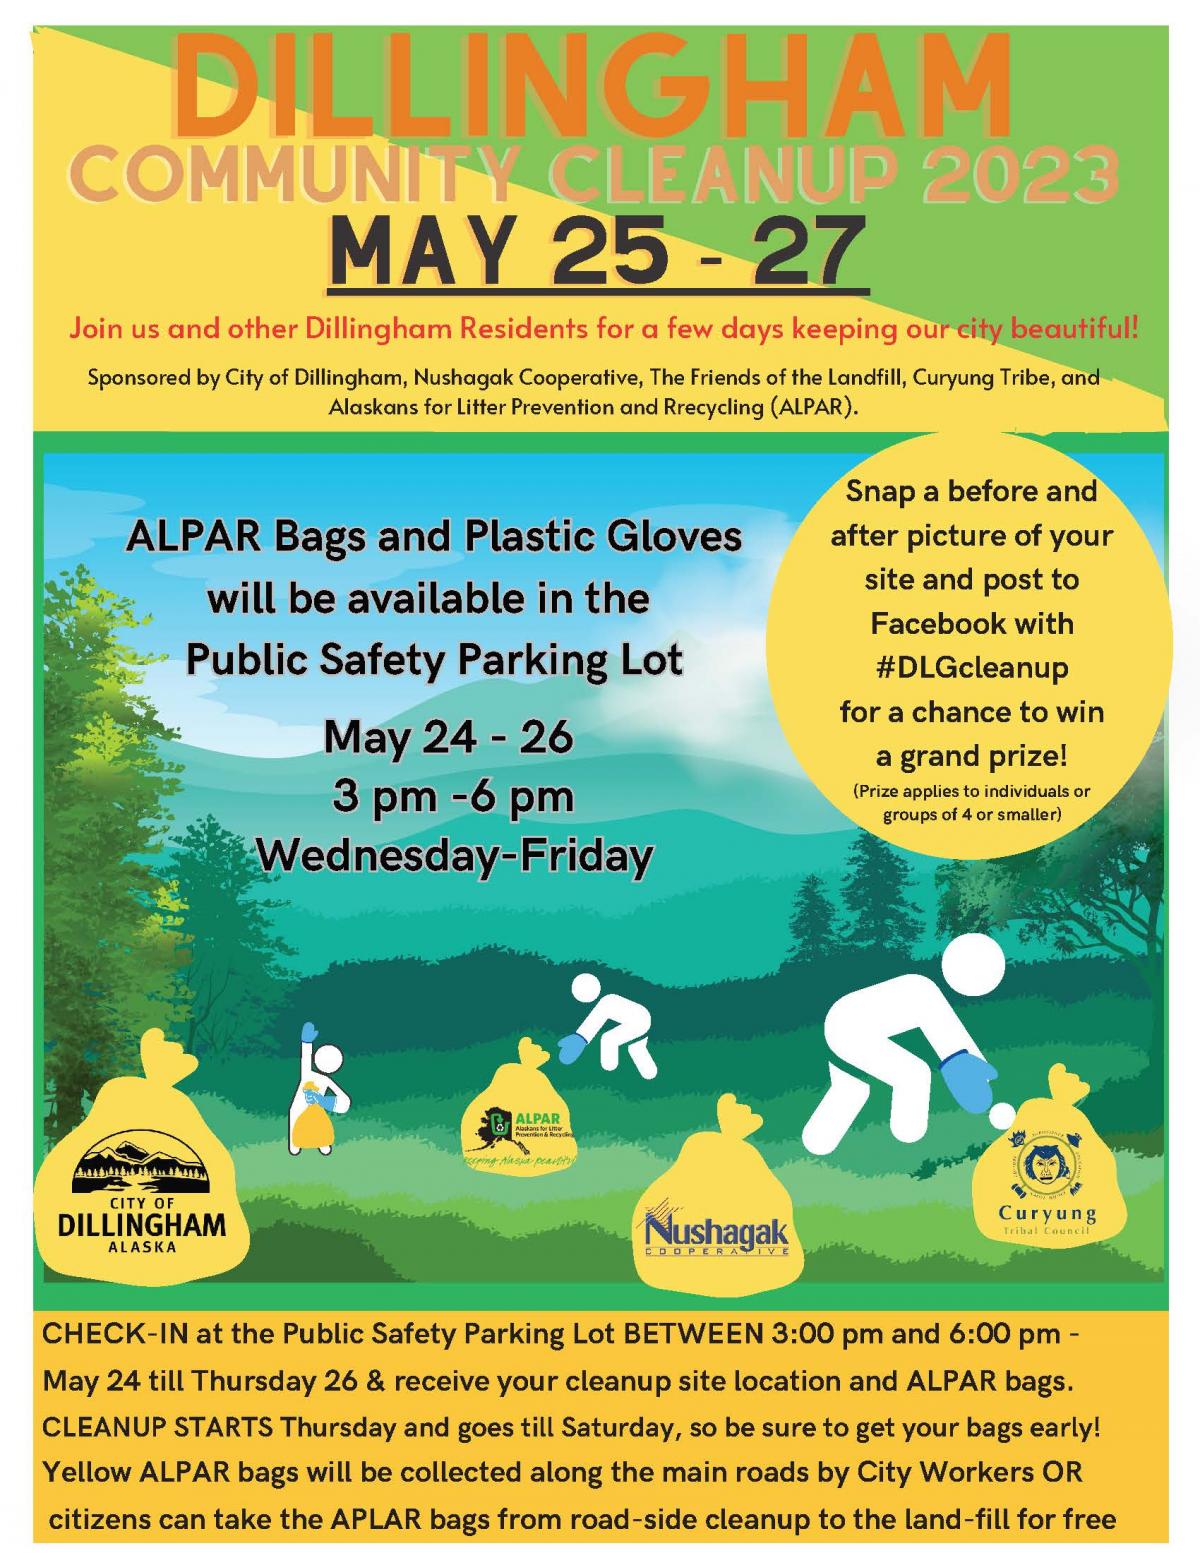 Community Cleanup 2023 May 25 - 27